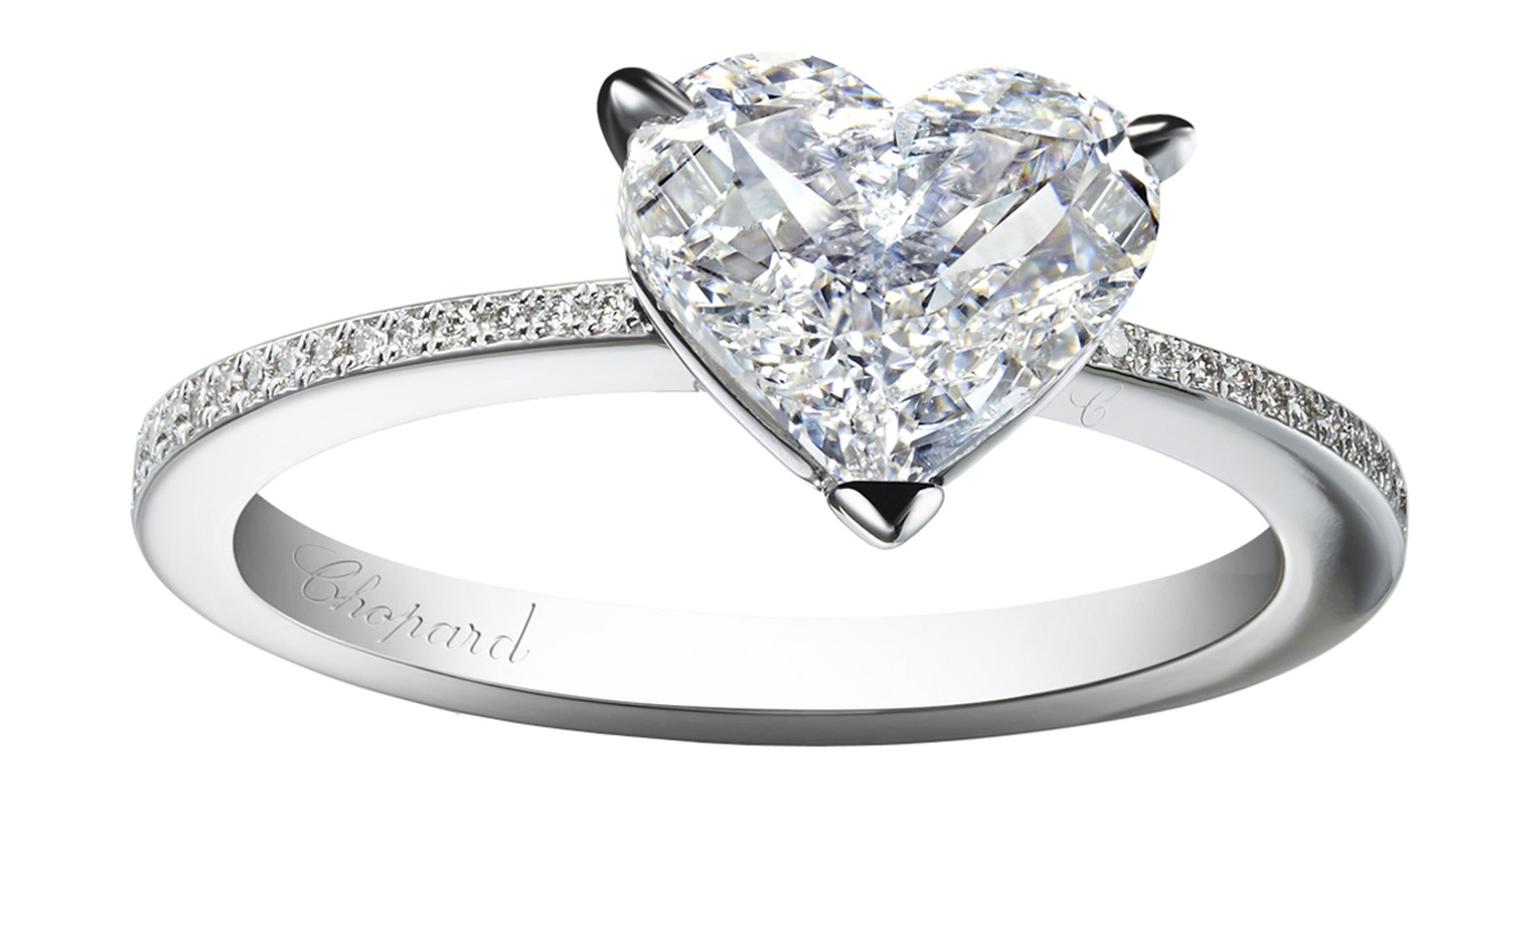 Chopard engagement ring with heart shaped diamond_20131115_Zoom